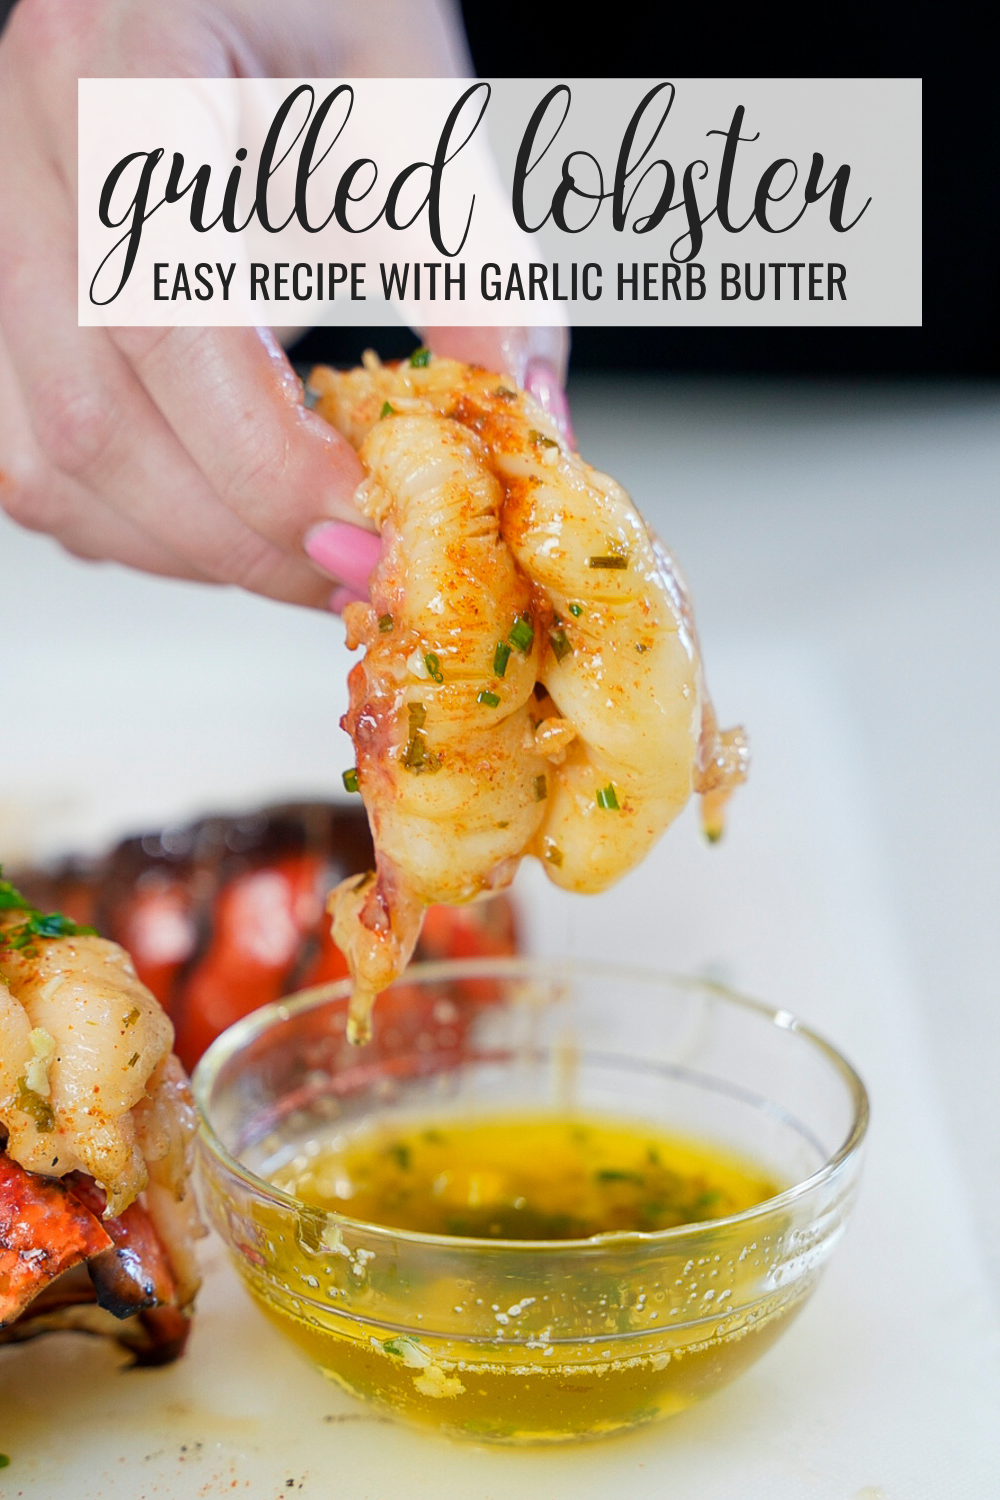 Grilled Lobster Recipe with Herb Garlic Butter - 10 Minute Recipe!